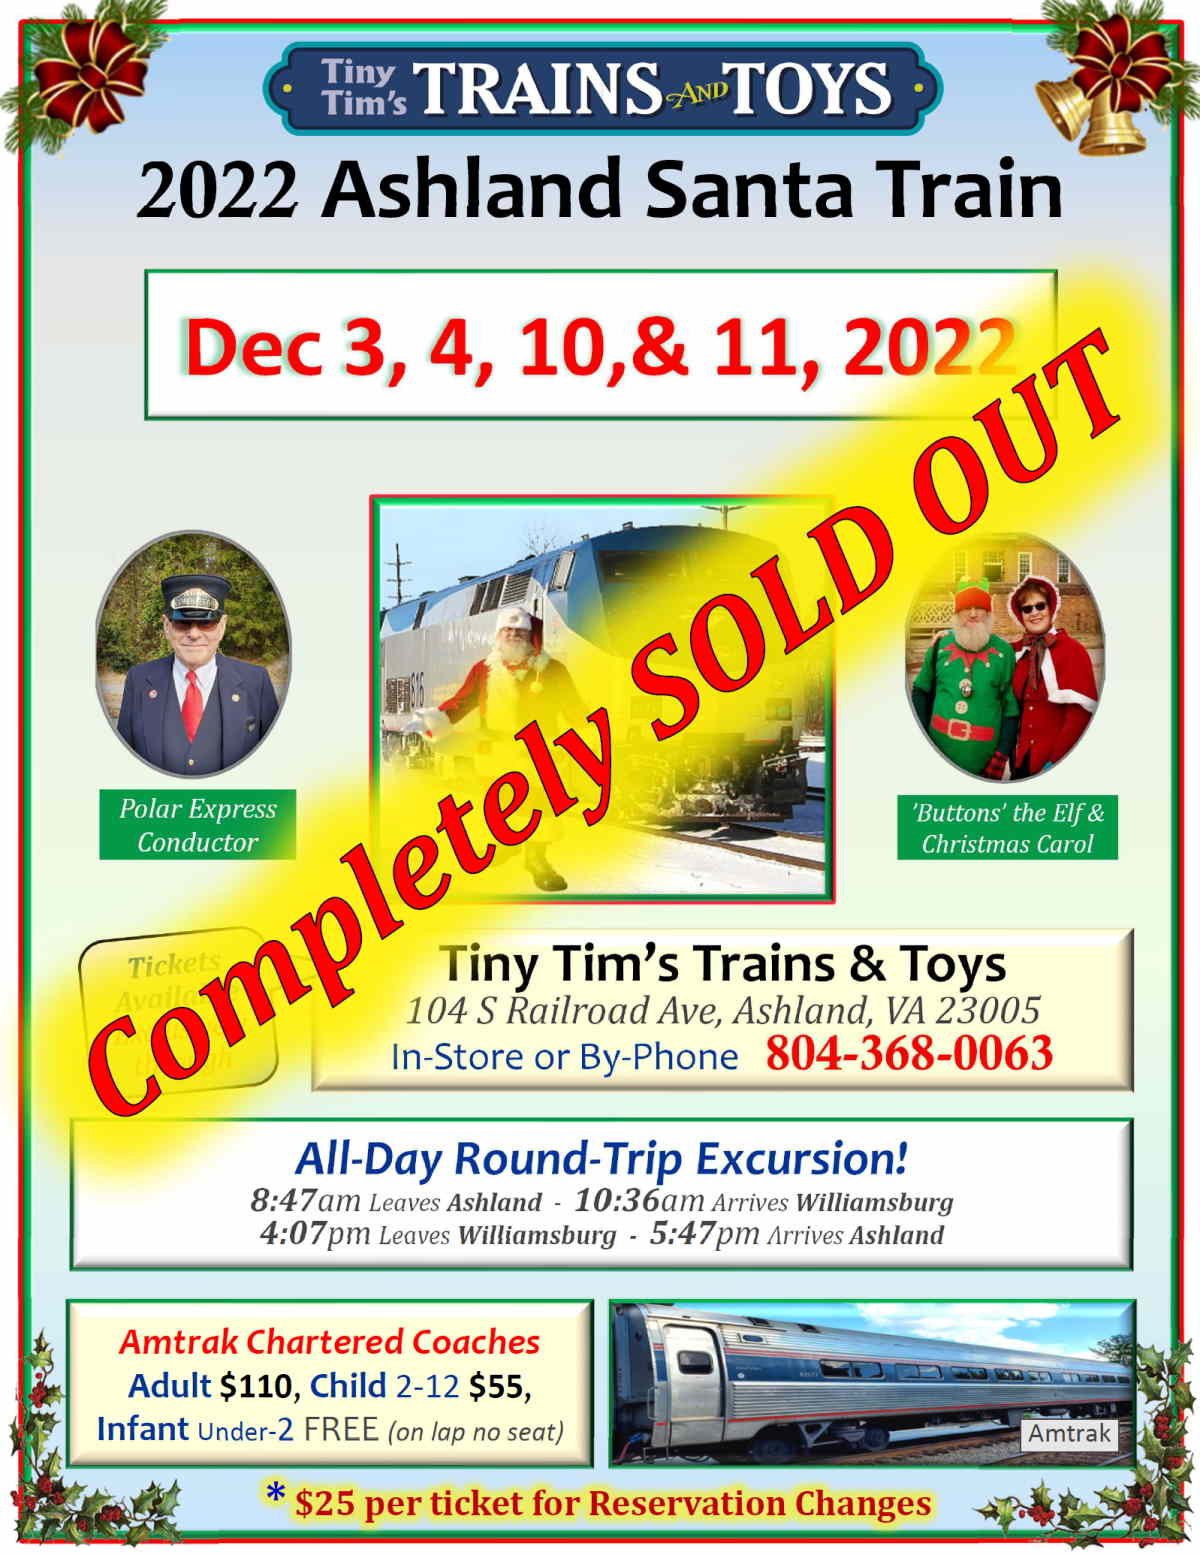 Tiny Tim 2022 Santa Train SOLD OUT